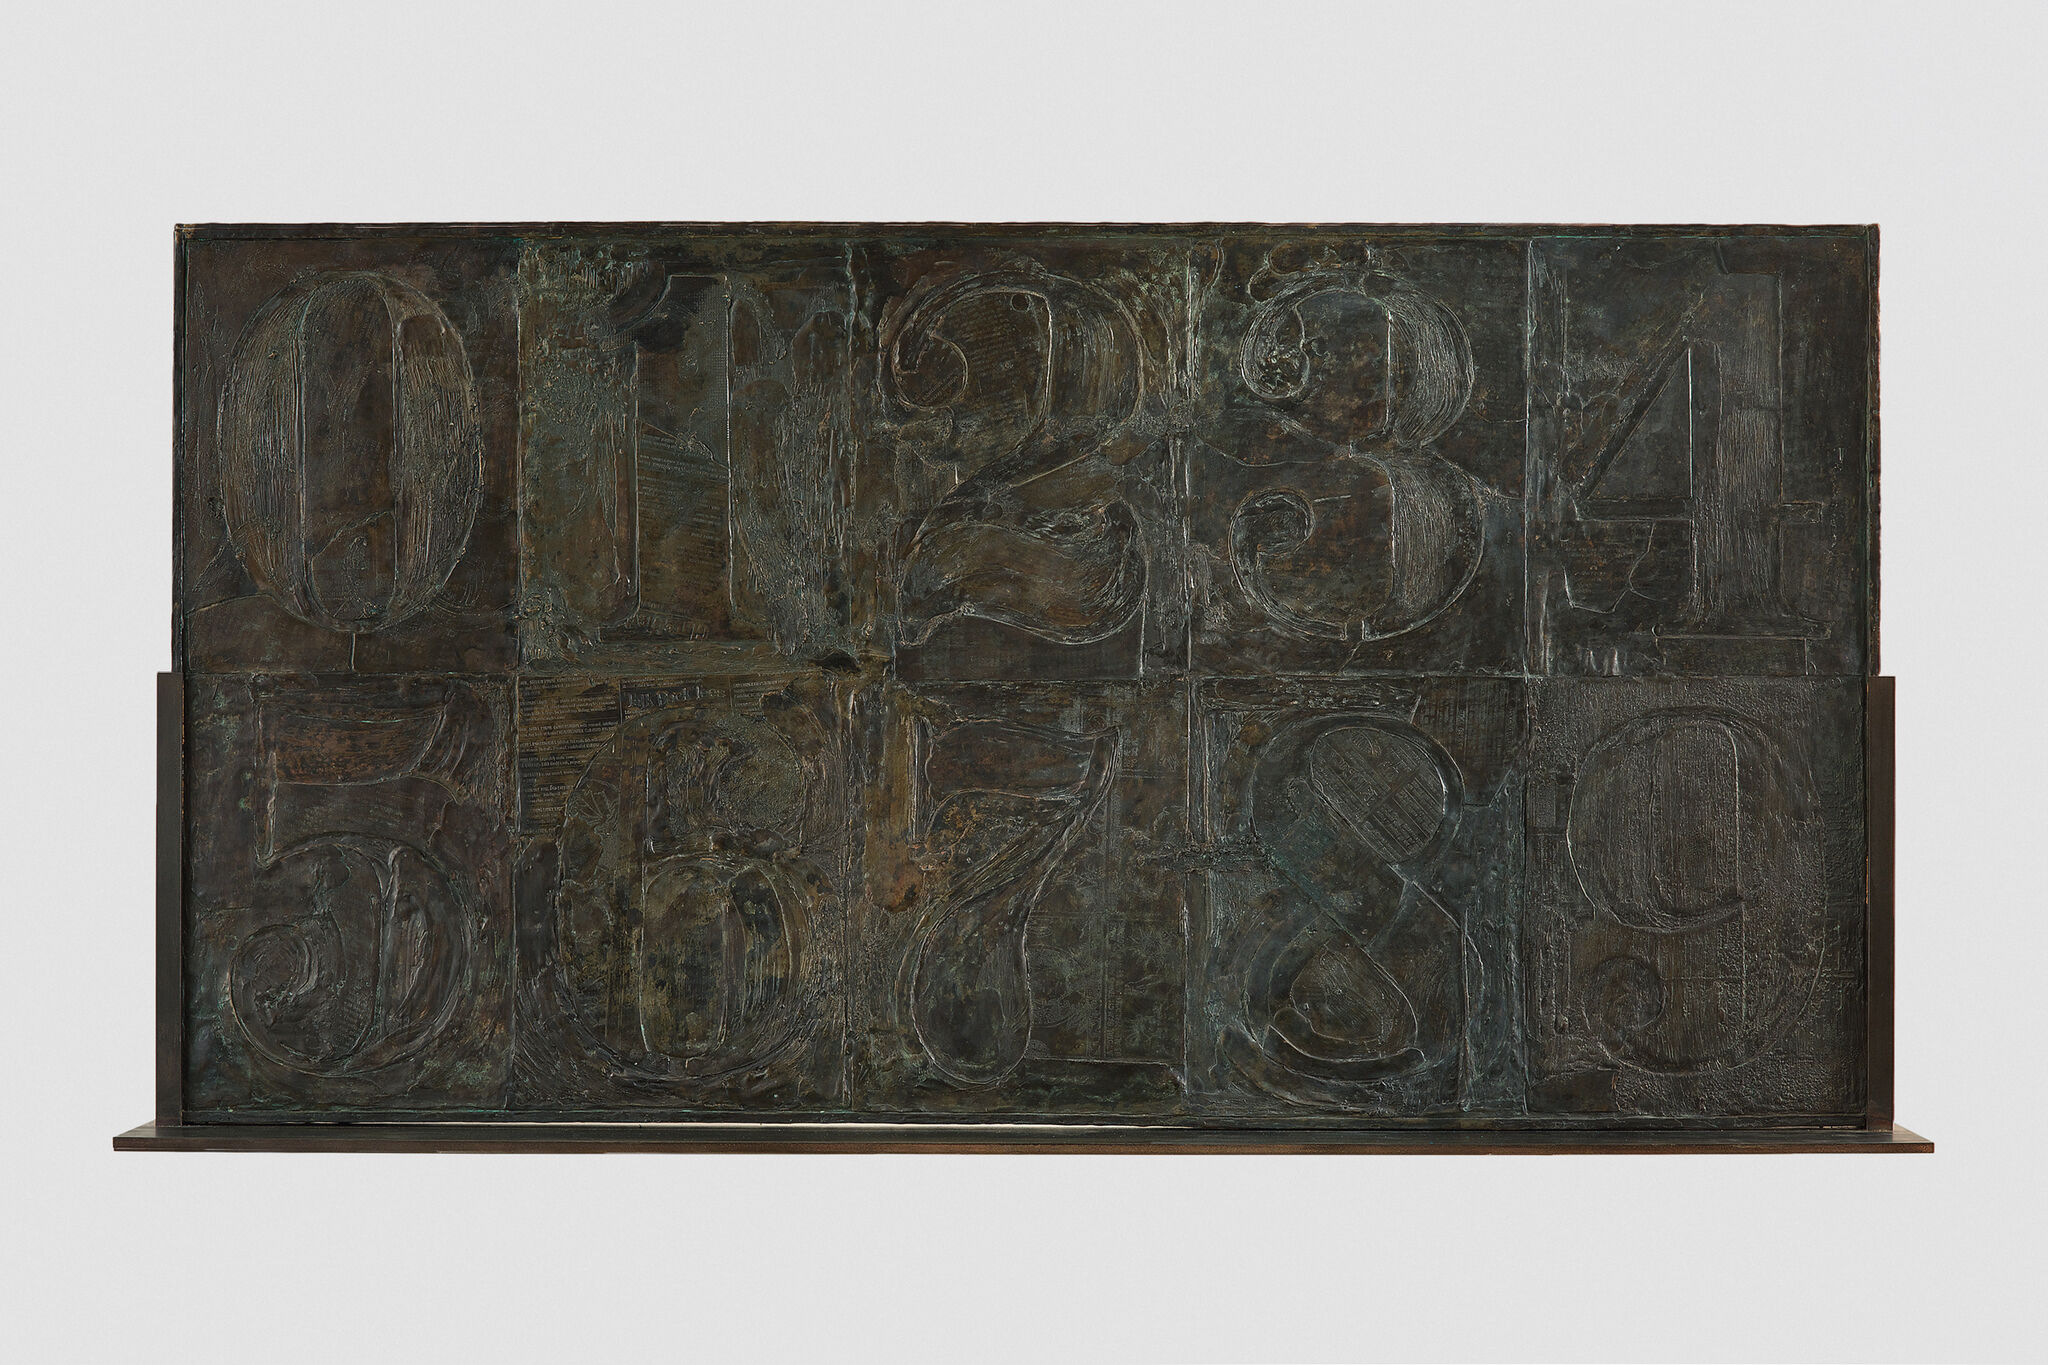 Series of numbers, 0 through 9, arranged in two rows on top of each other in a wide rectangle, and subtly distinguished from each other and their bronze background by differing textural patterns.